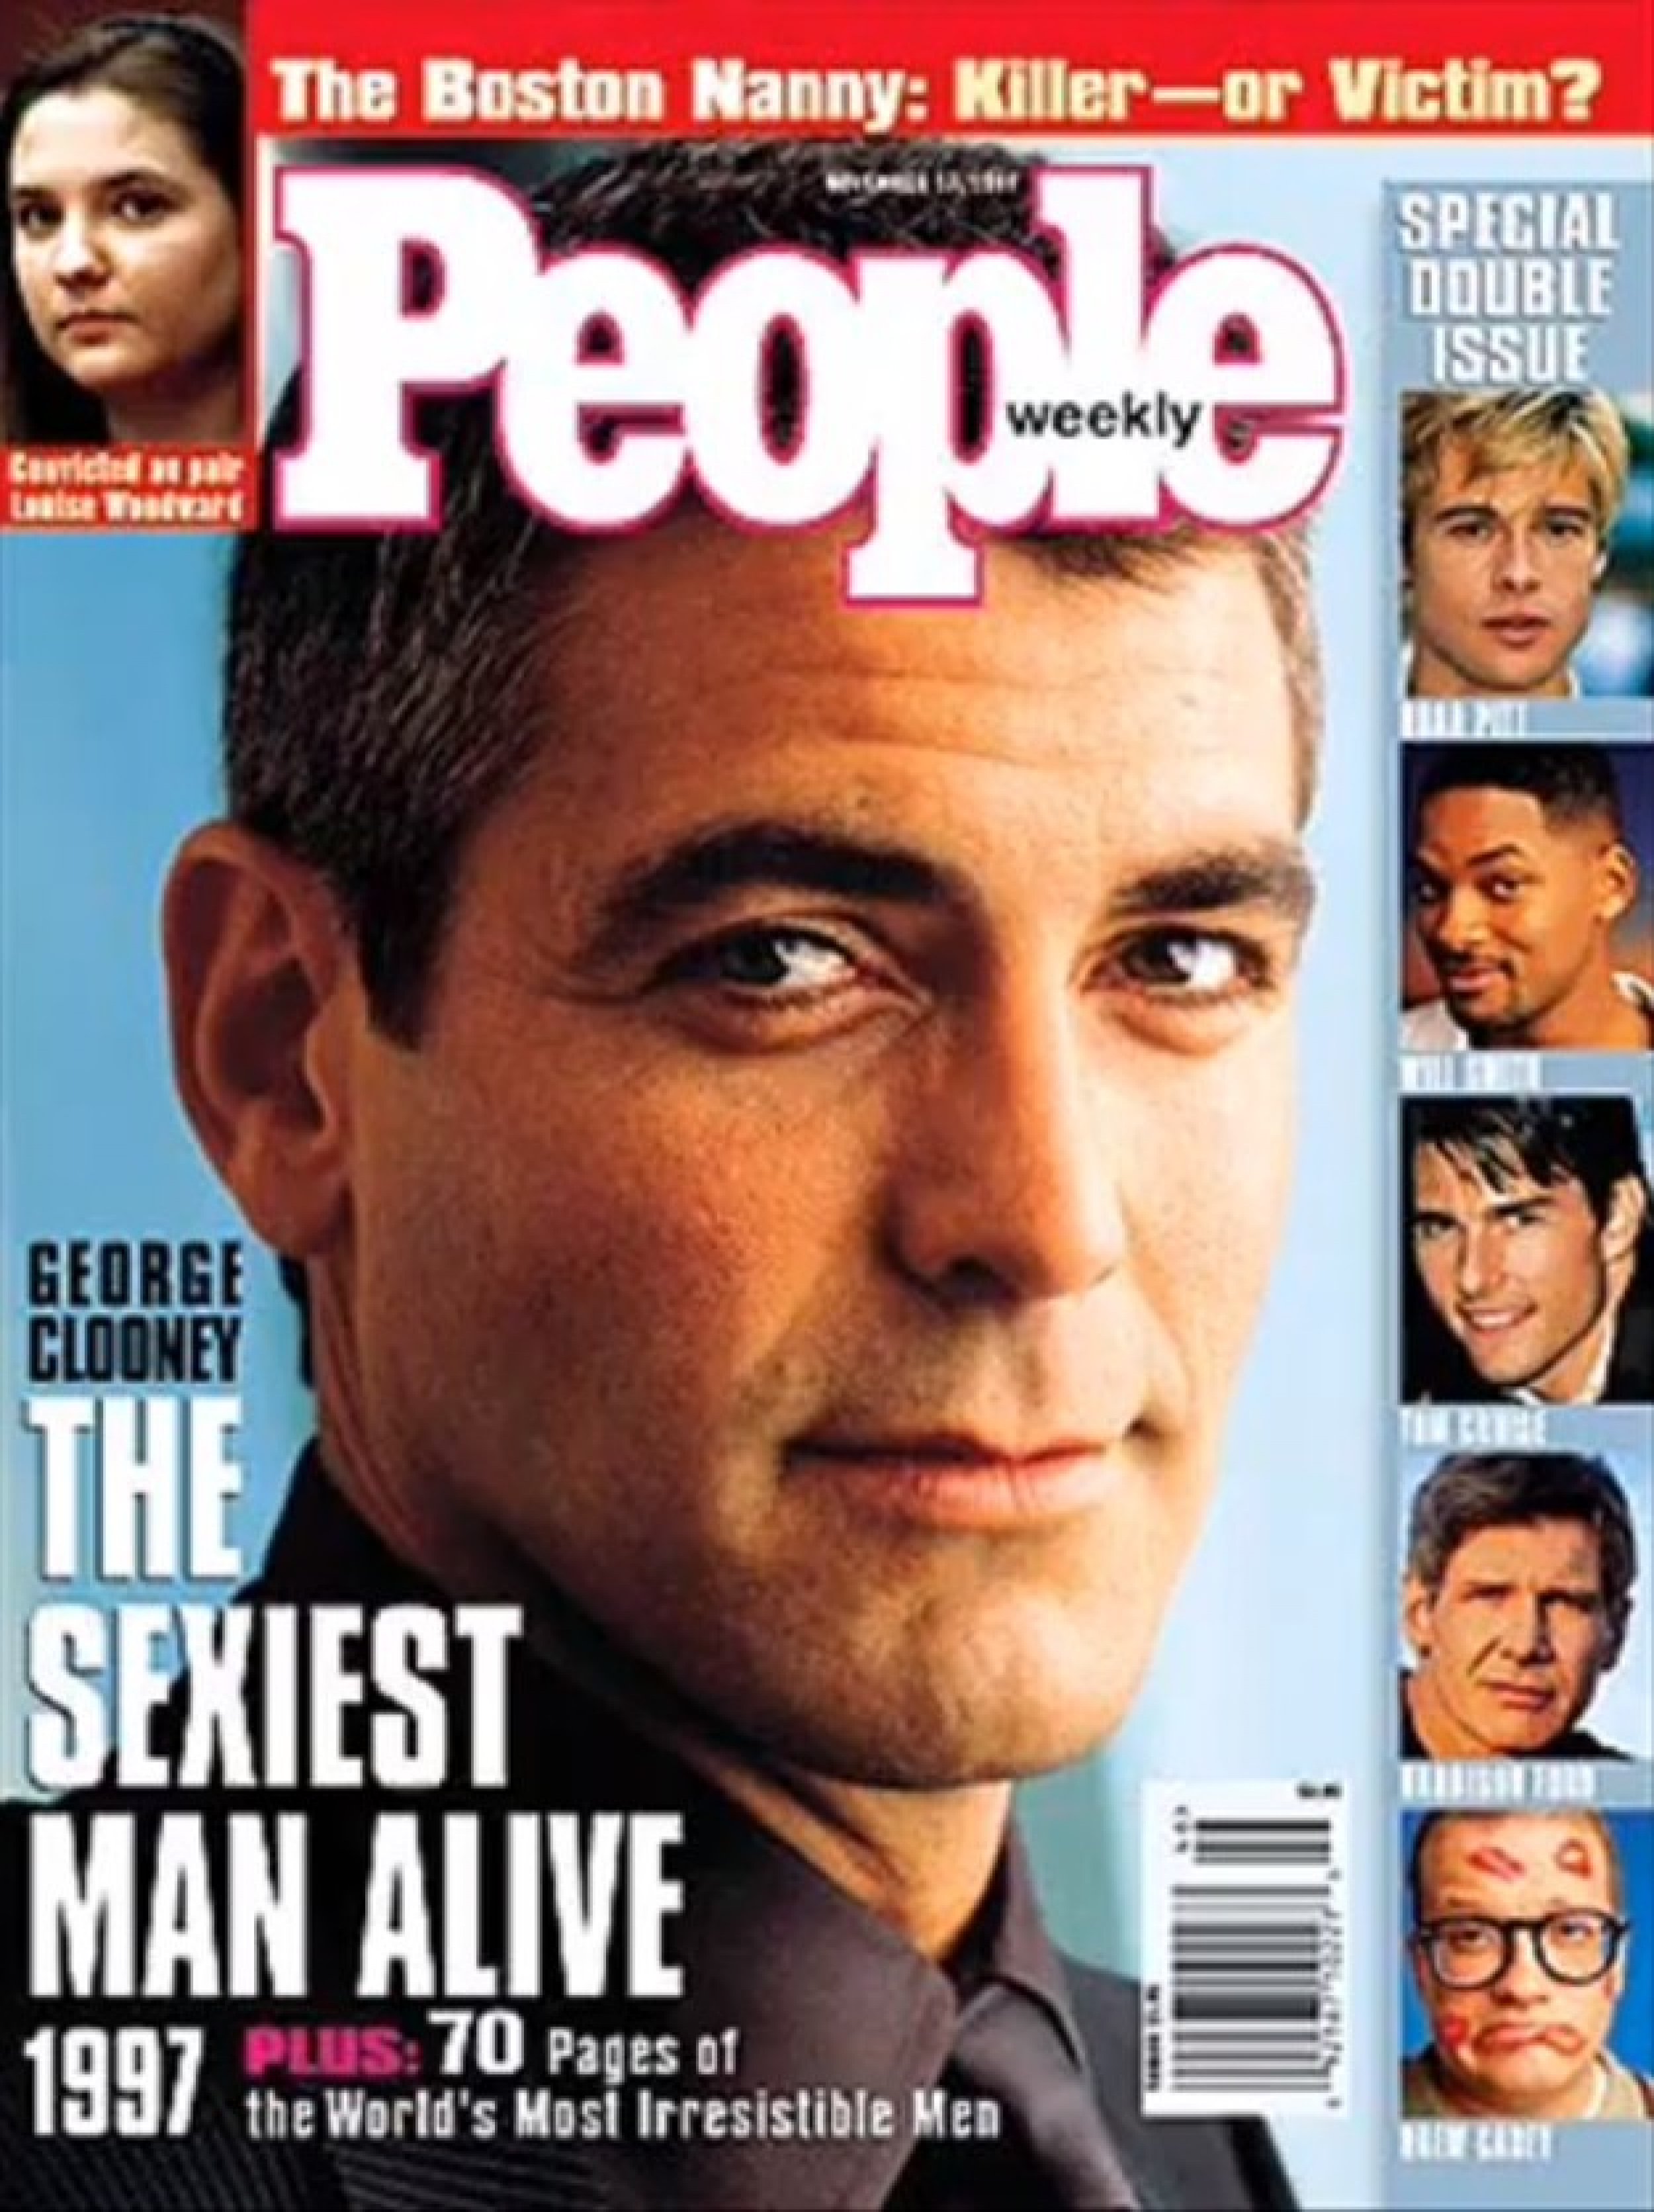 Peoples Sexiest Man Alive Winners From The Past 20 Years Photos Ibtimes 